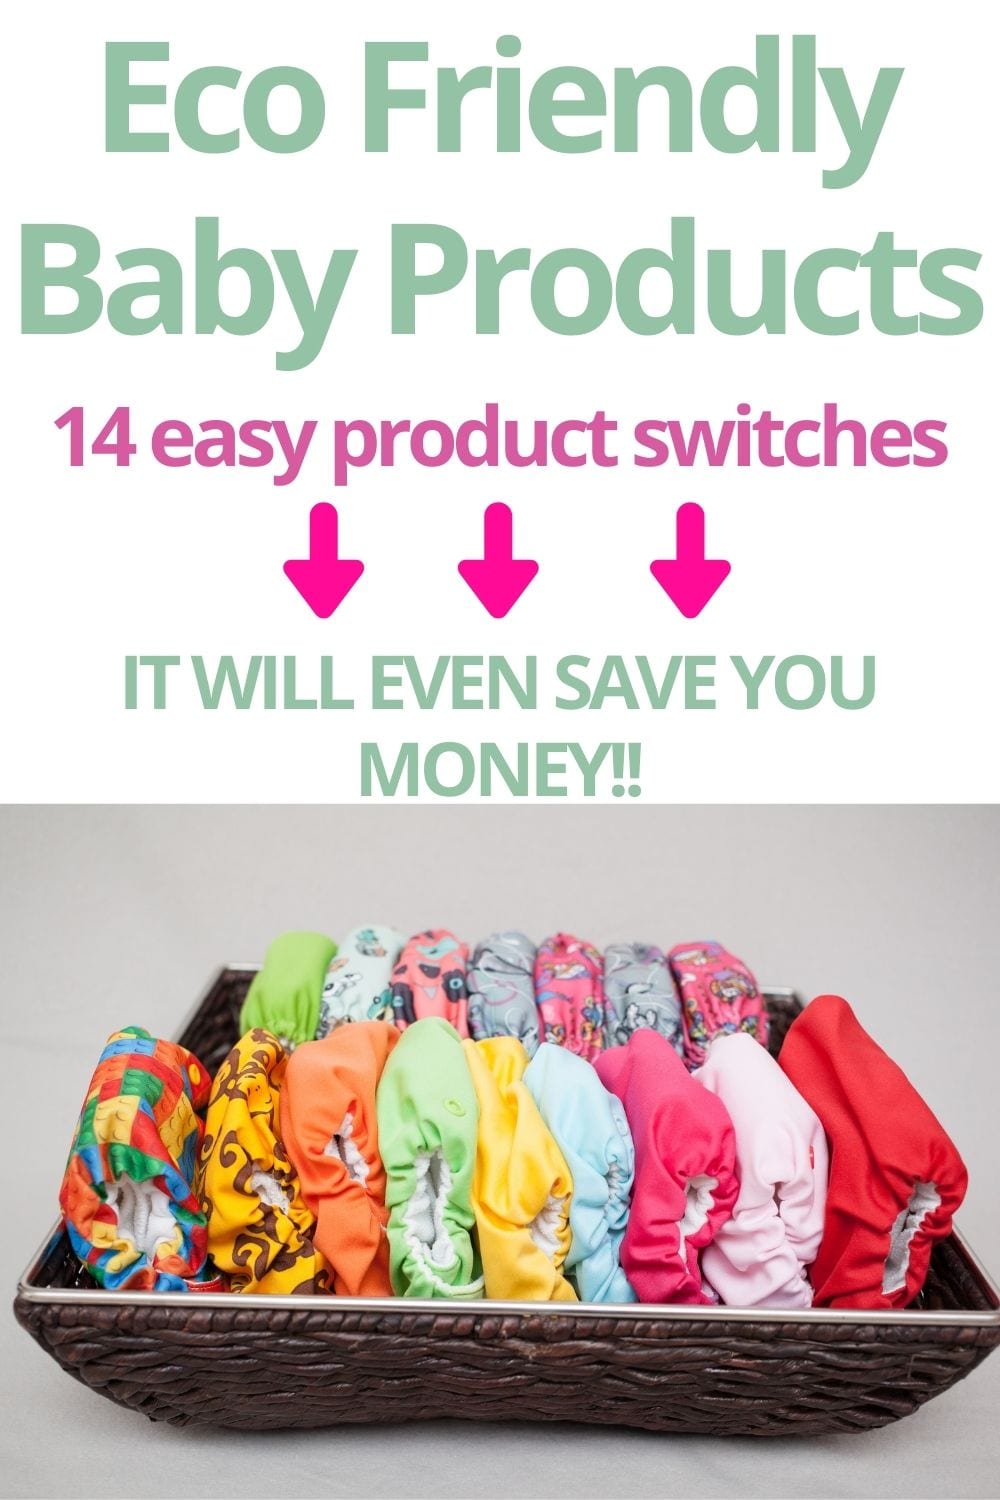 eco friendly baby products uk